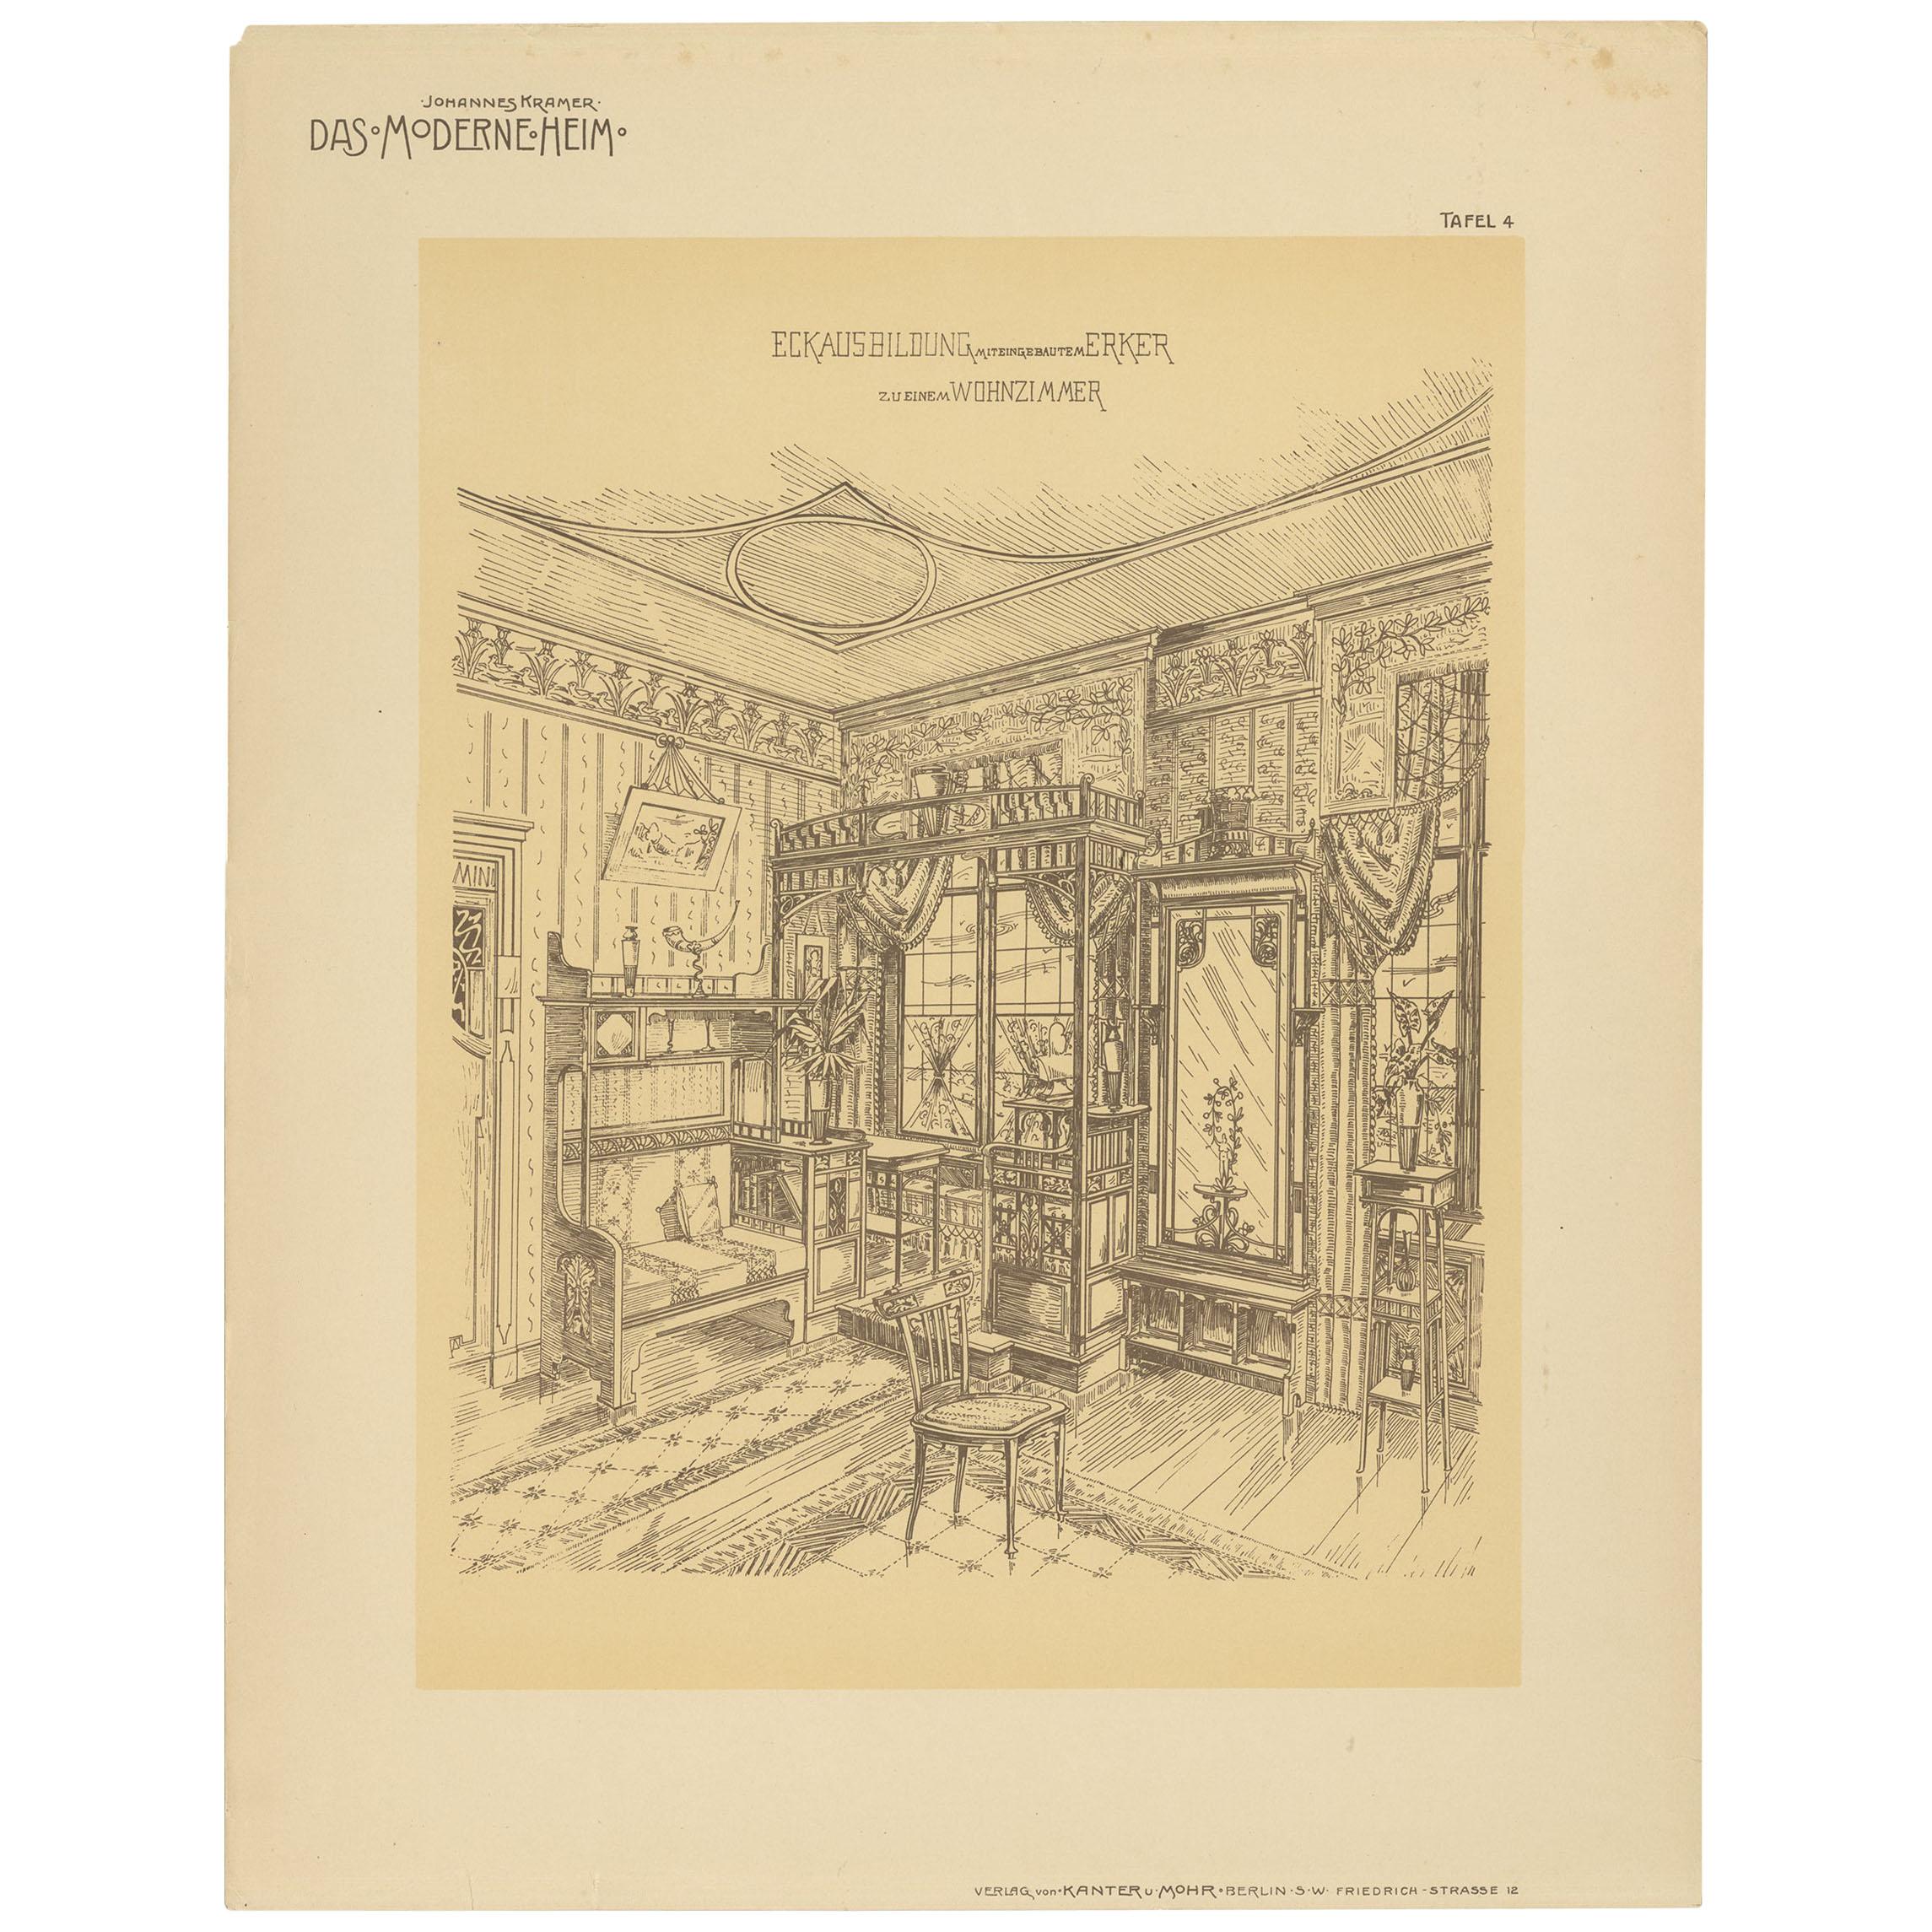 Pl. 4 Antique Print of a Living Room with Bay Window by Kramer, circa 1910